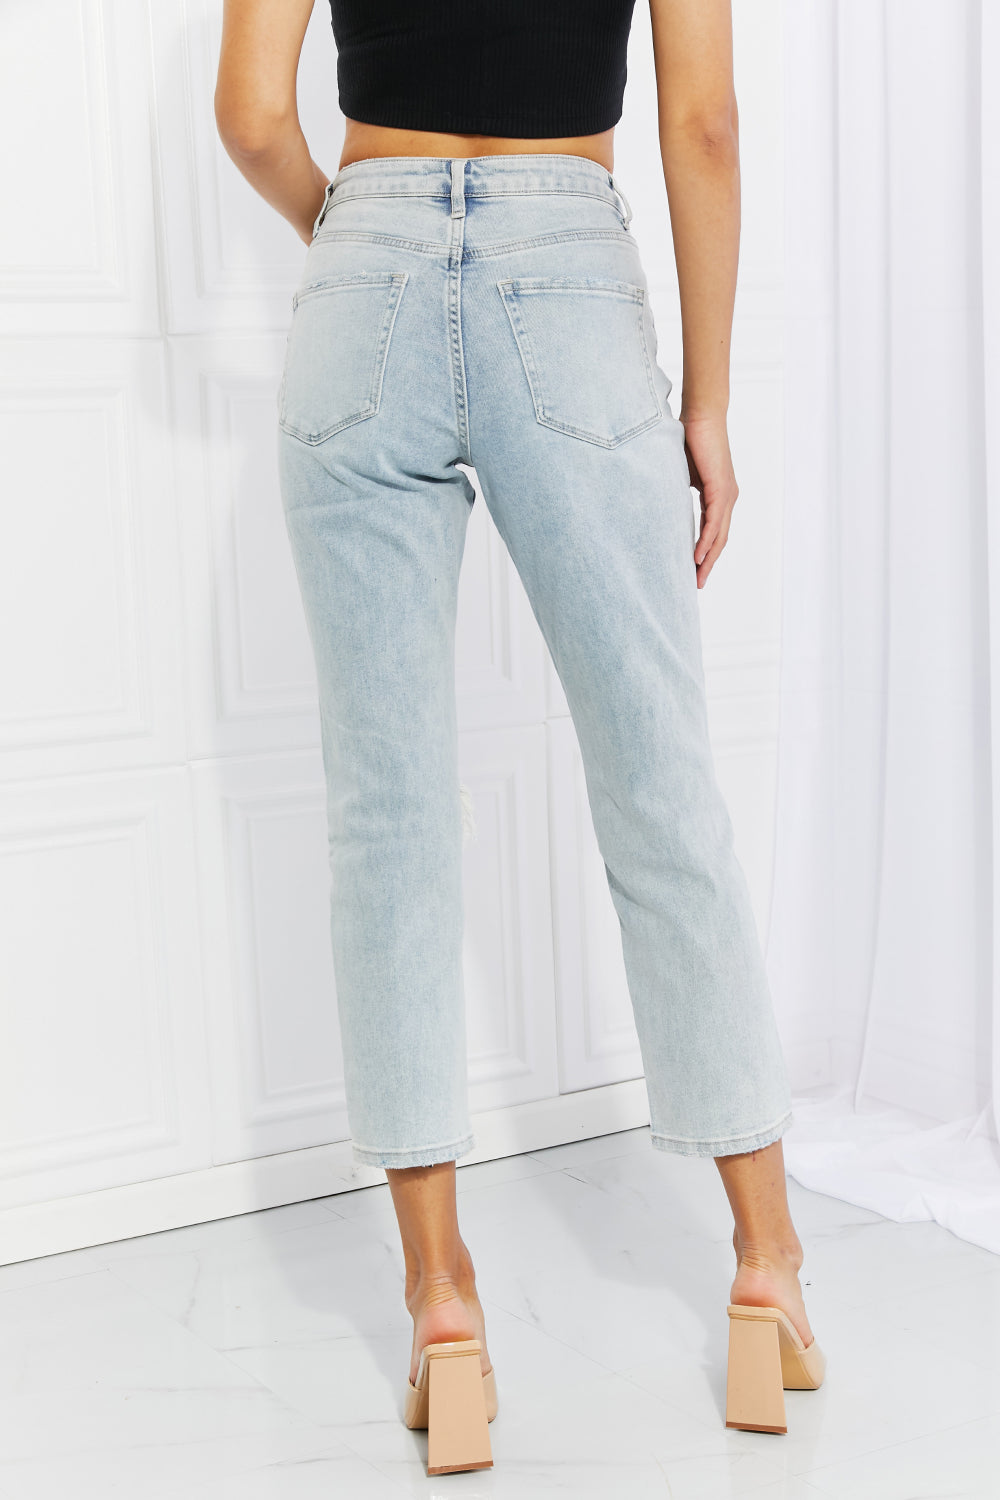 Vervet by Flying Monkey Stand Out Distressed Cropped Jeans